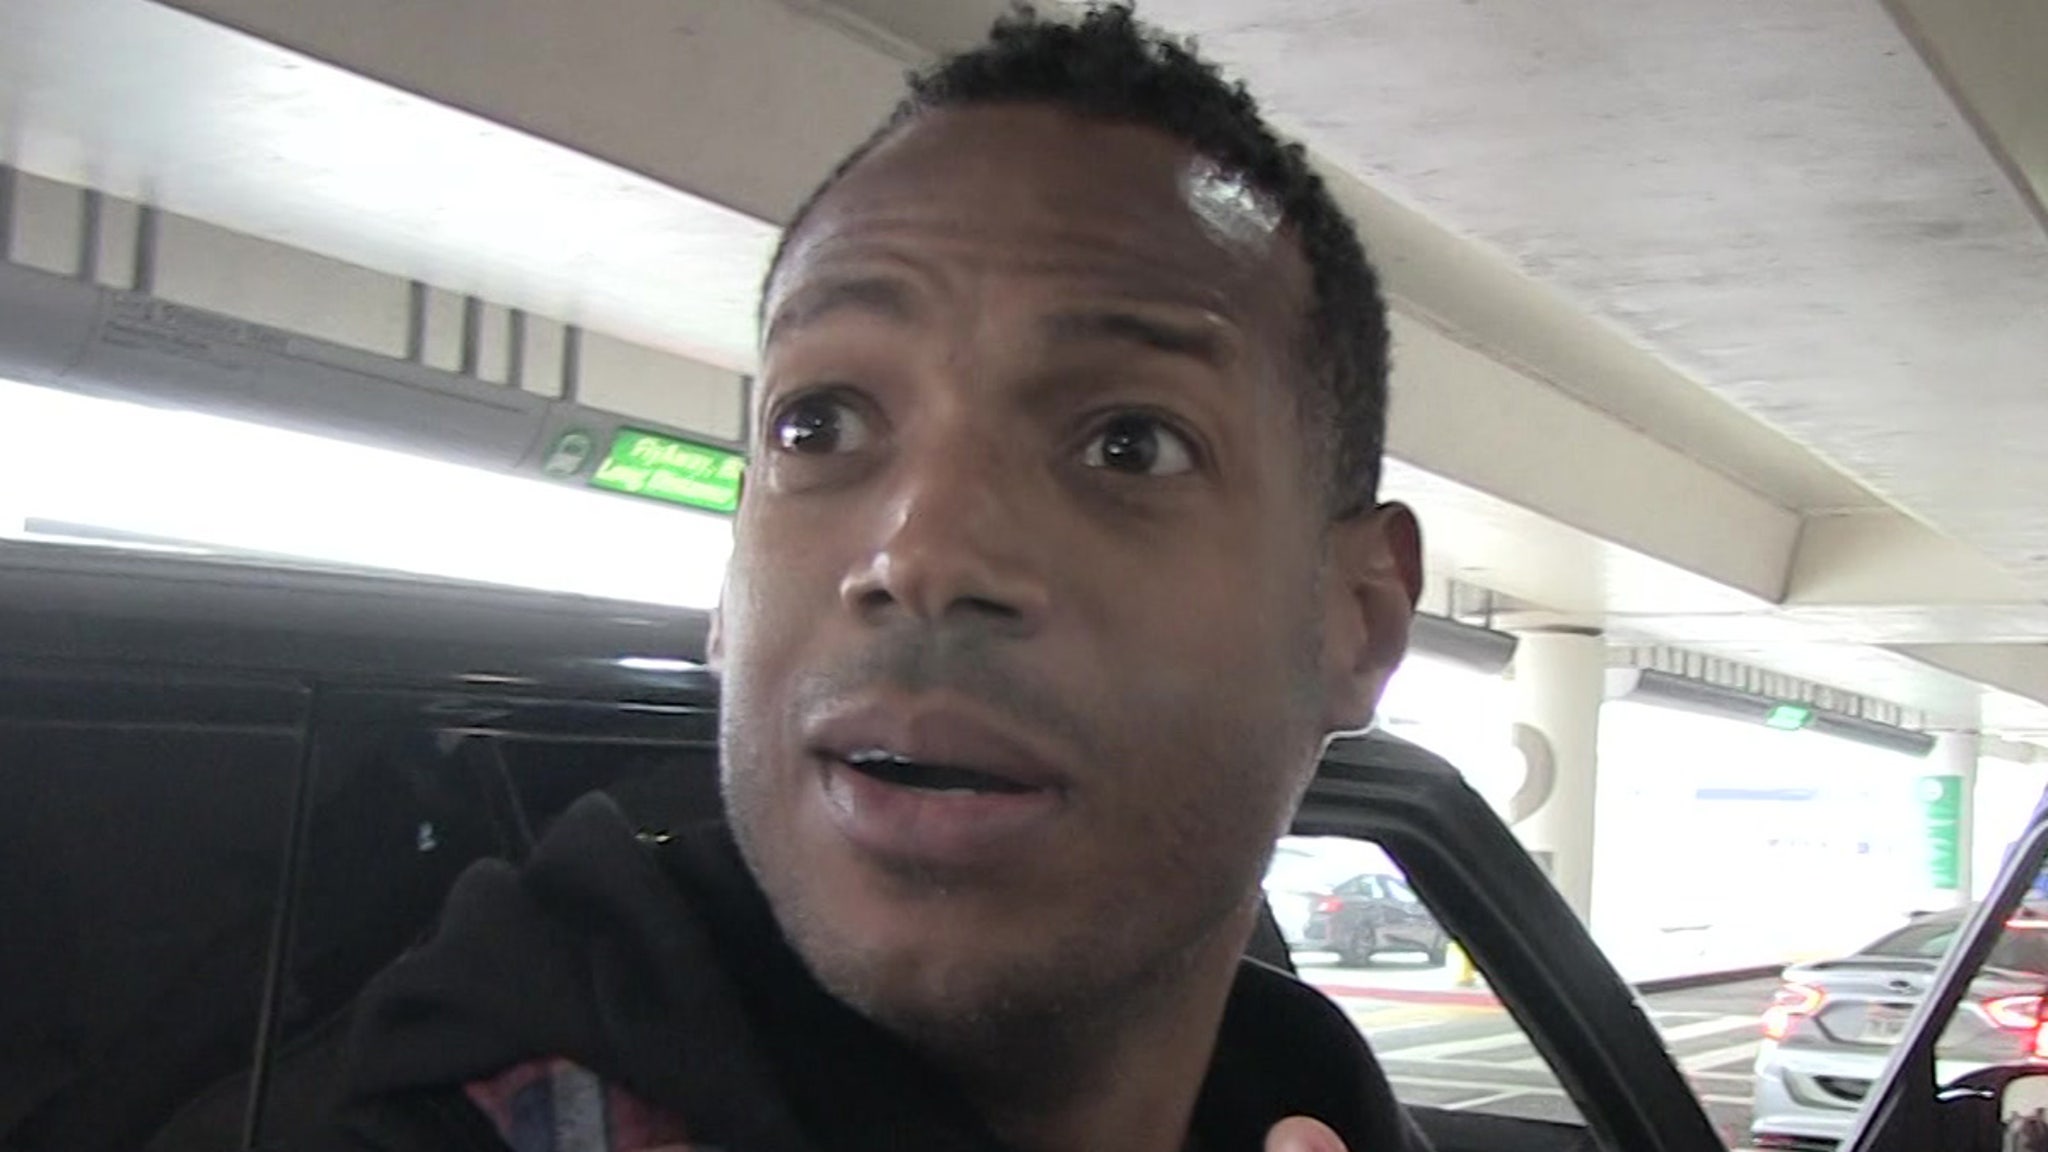 Marlon Wayans gets kicked off United Airlines flight and demands apologies